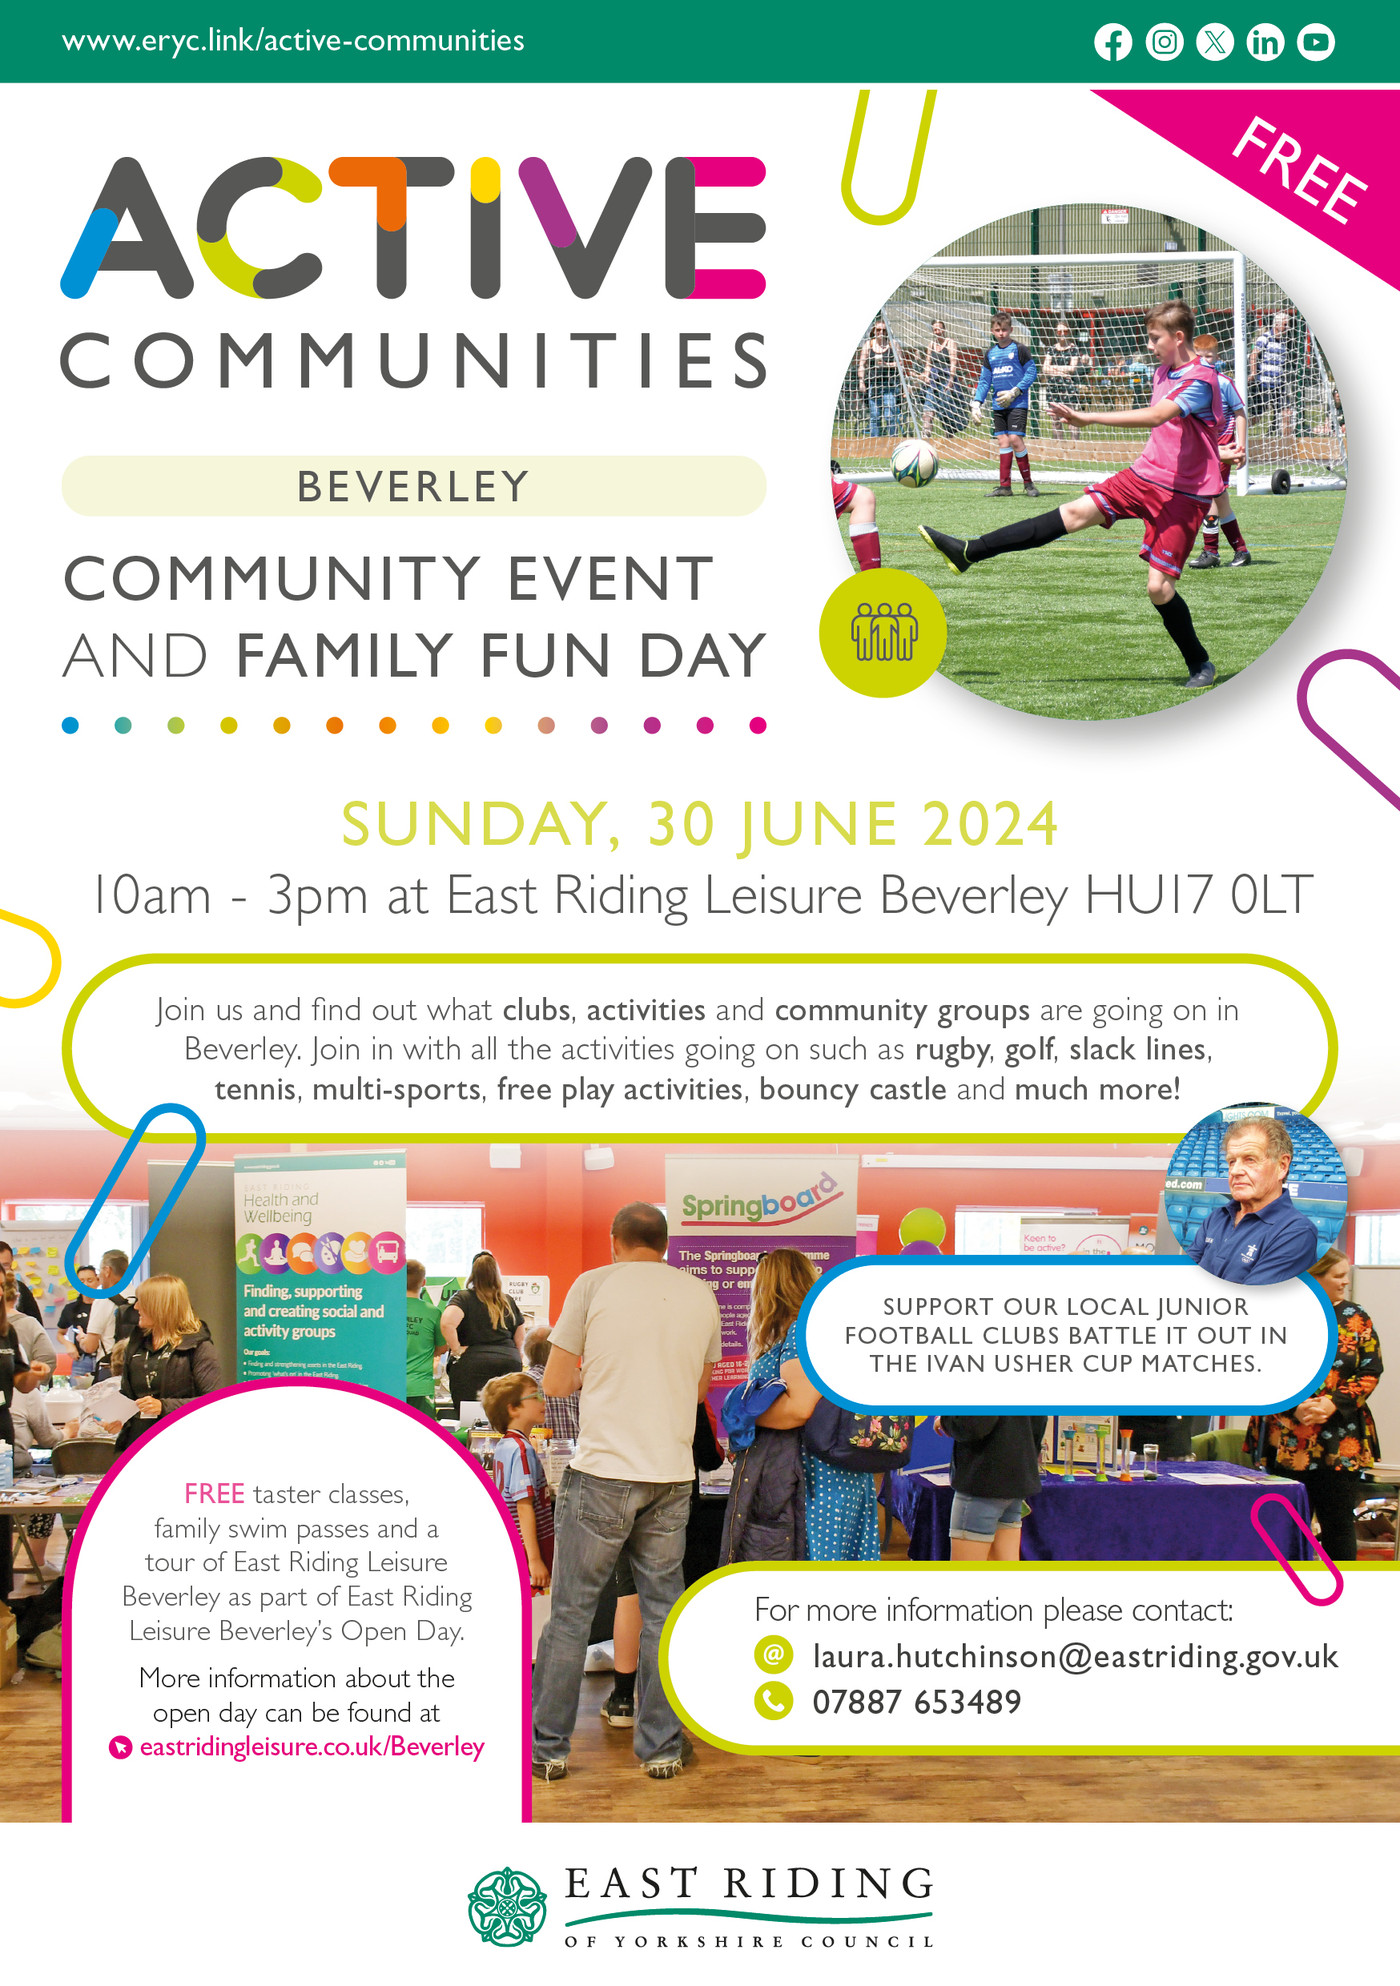 Community Event and Family Fun Day   Beverley